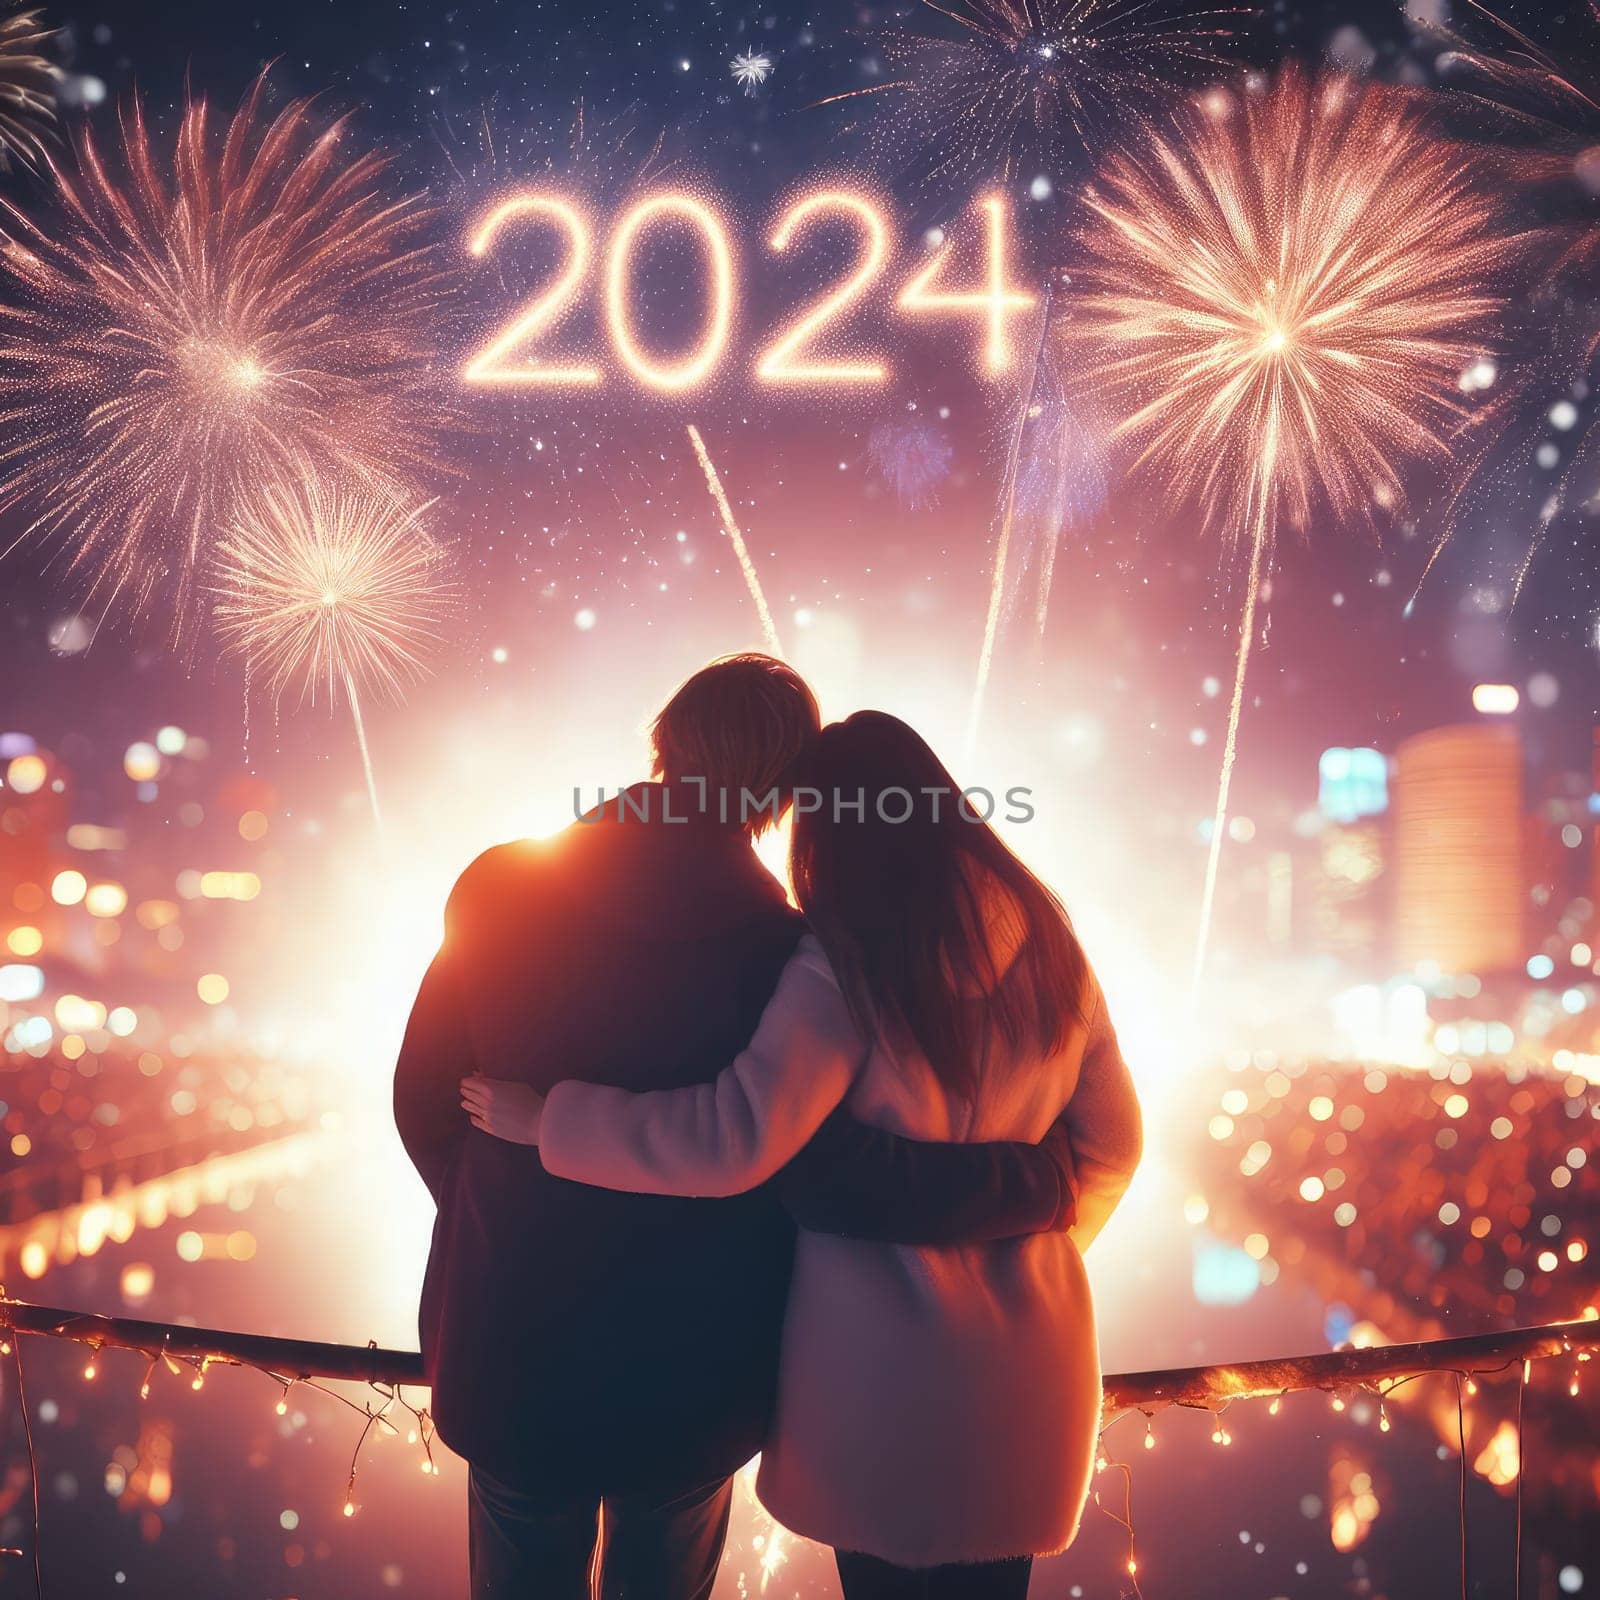 Greeting card Happy New Year 2024. Beautiful holiday web banner or billboard with Golden sparkling text Happy New Year 2024 written sparklers on festive blue background with fireworks